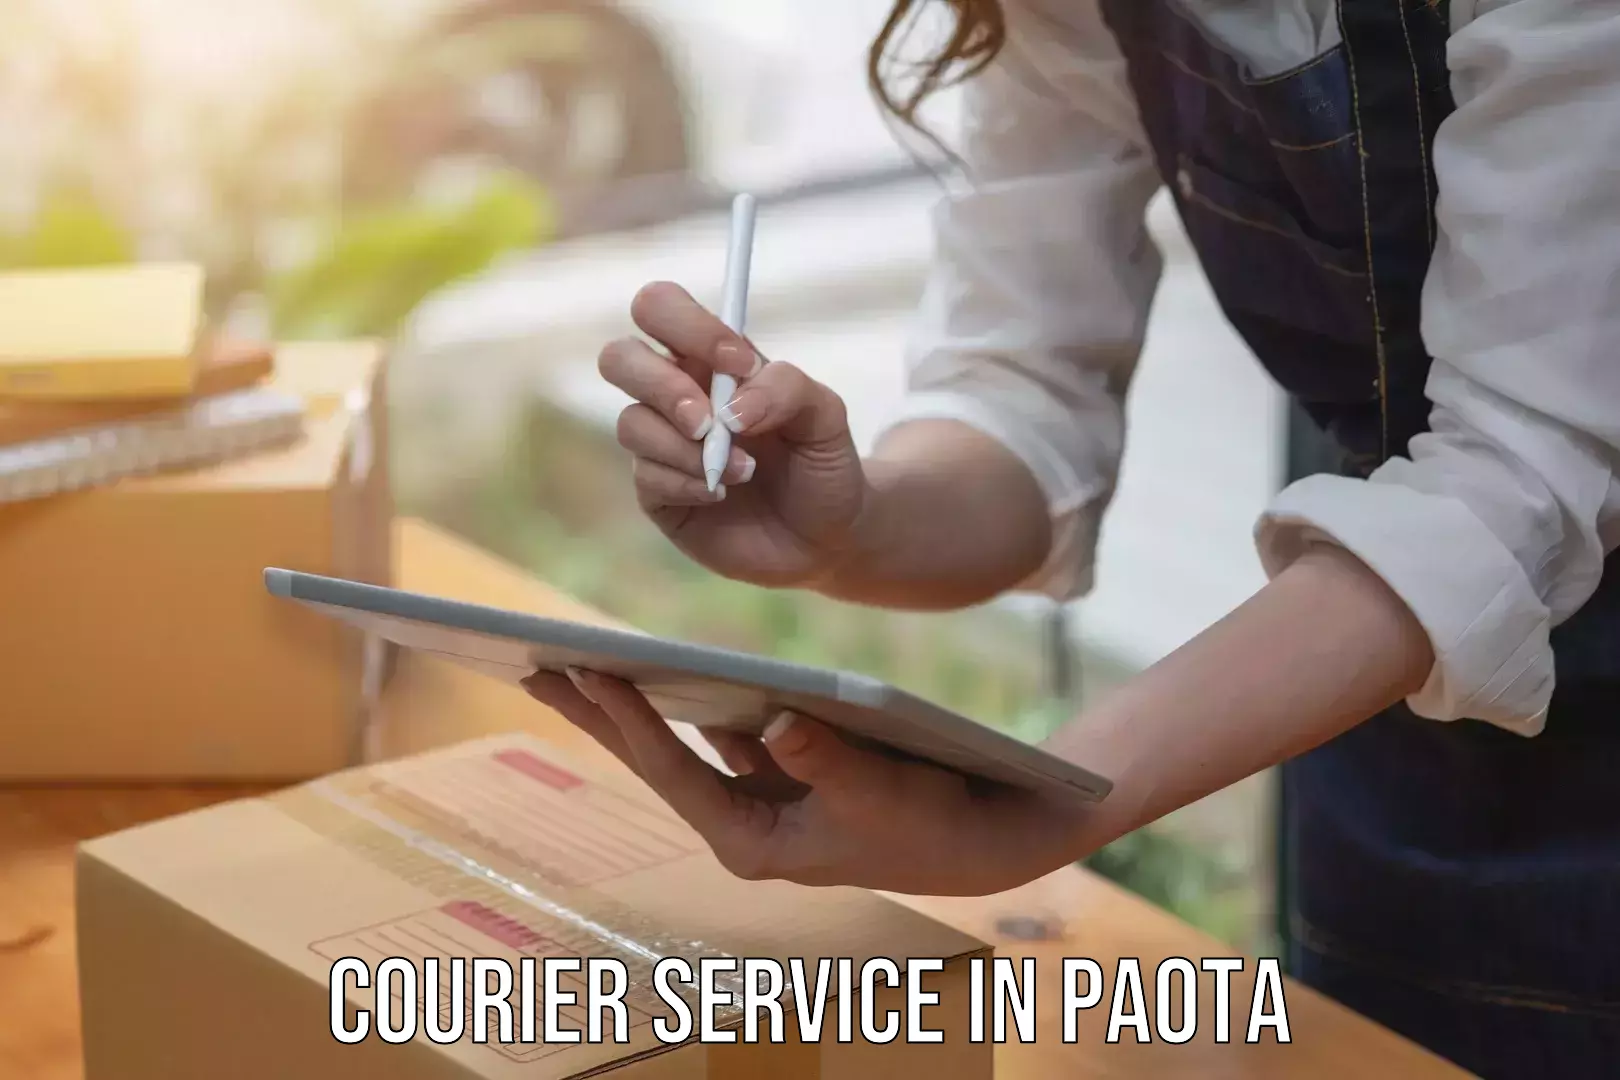 24/7 courier service in Paota